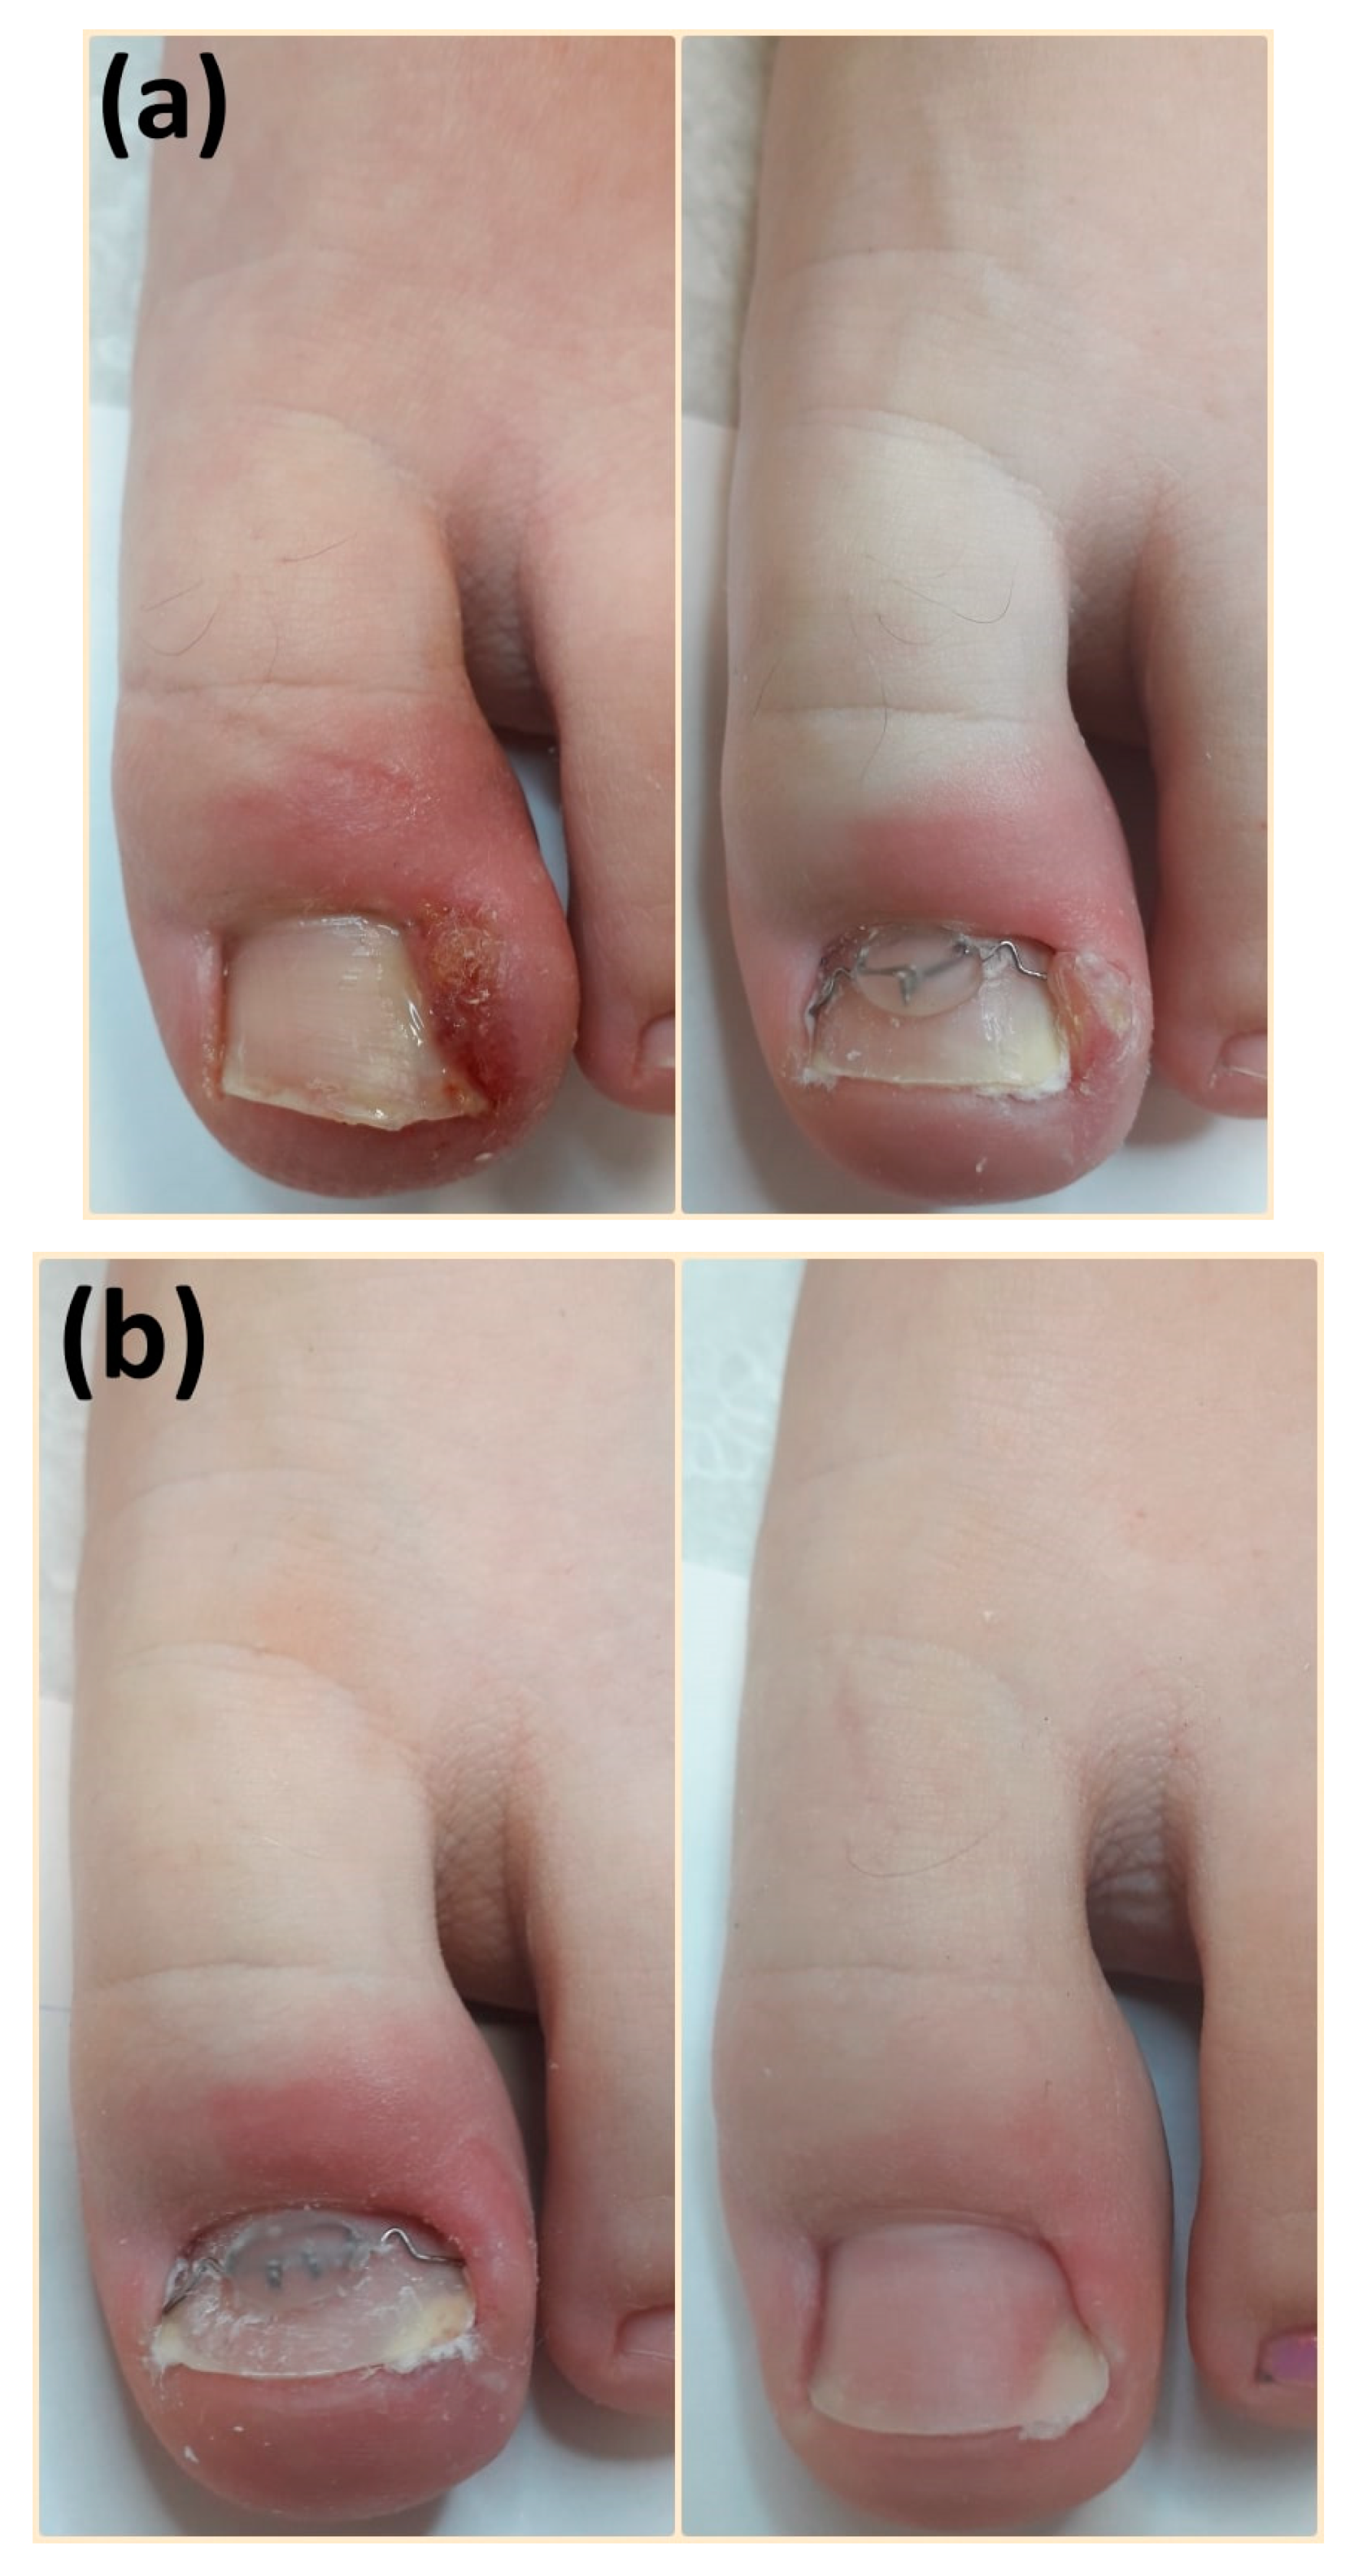 Nail changes - clinical review | GPonline